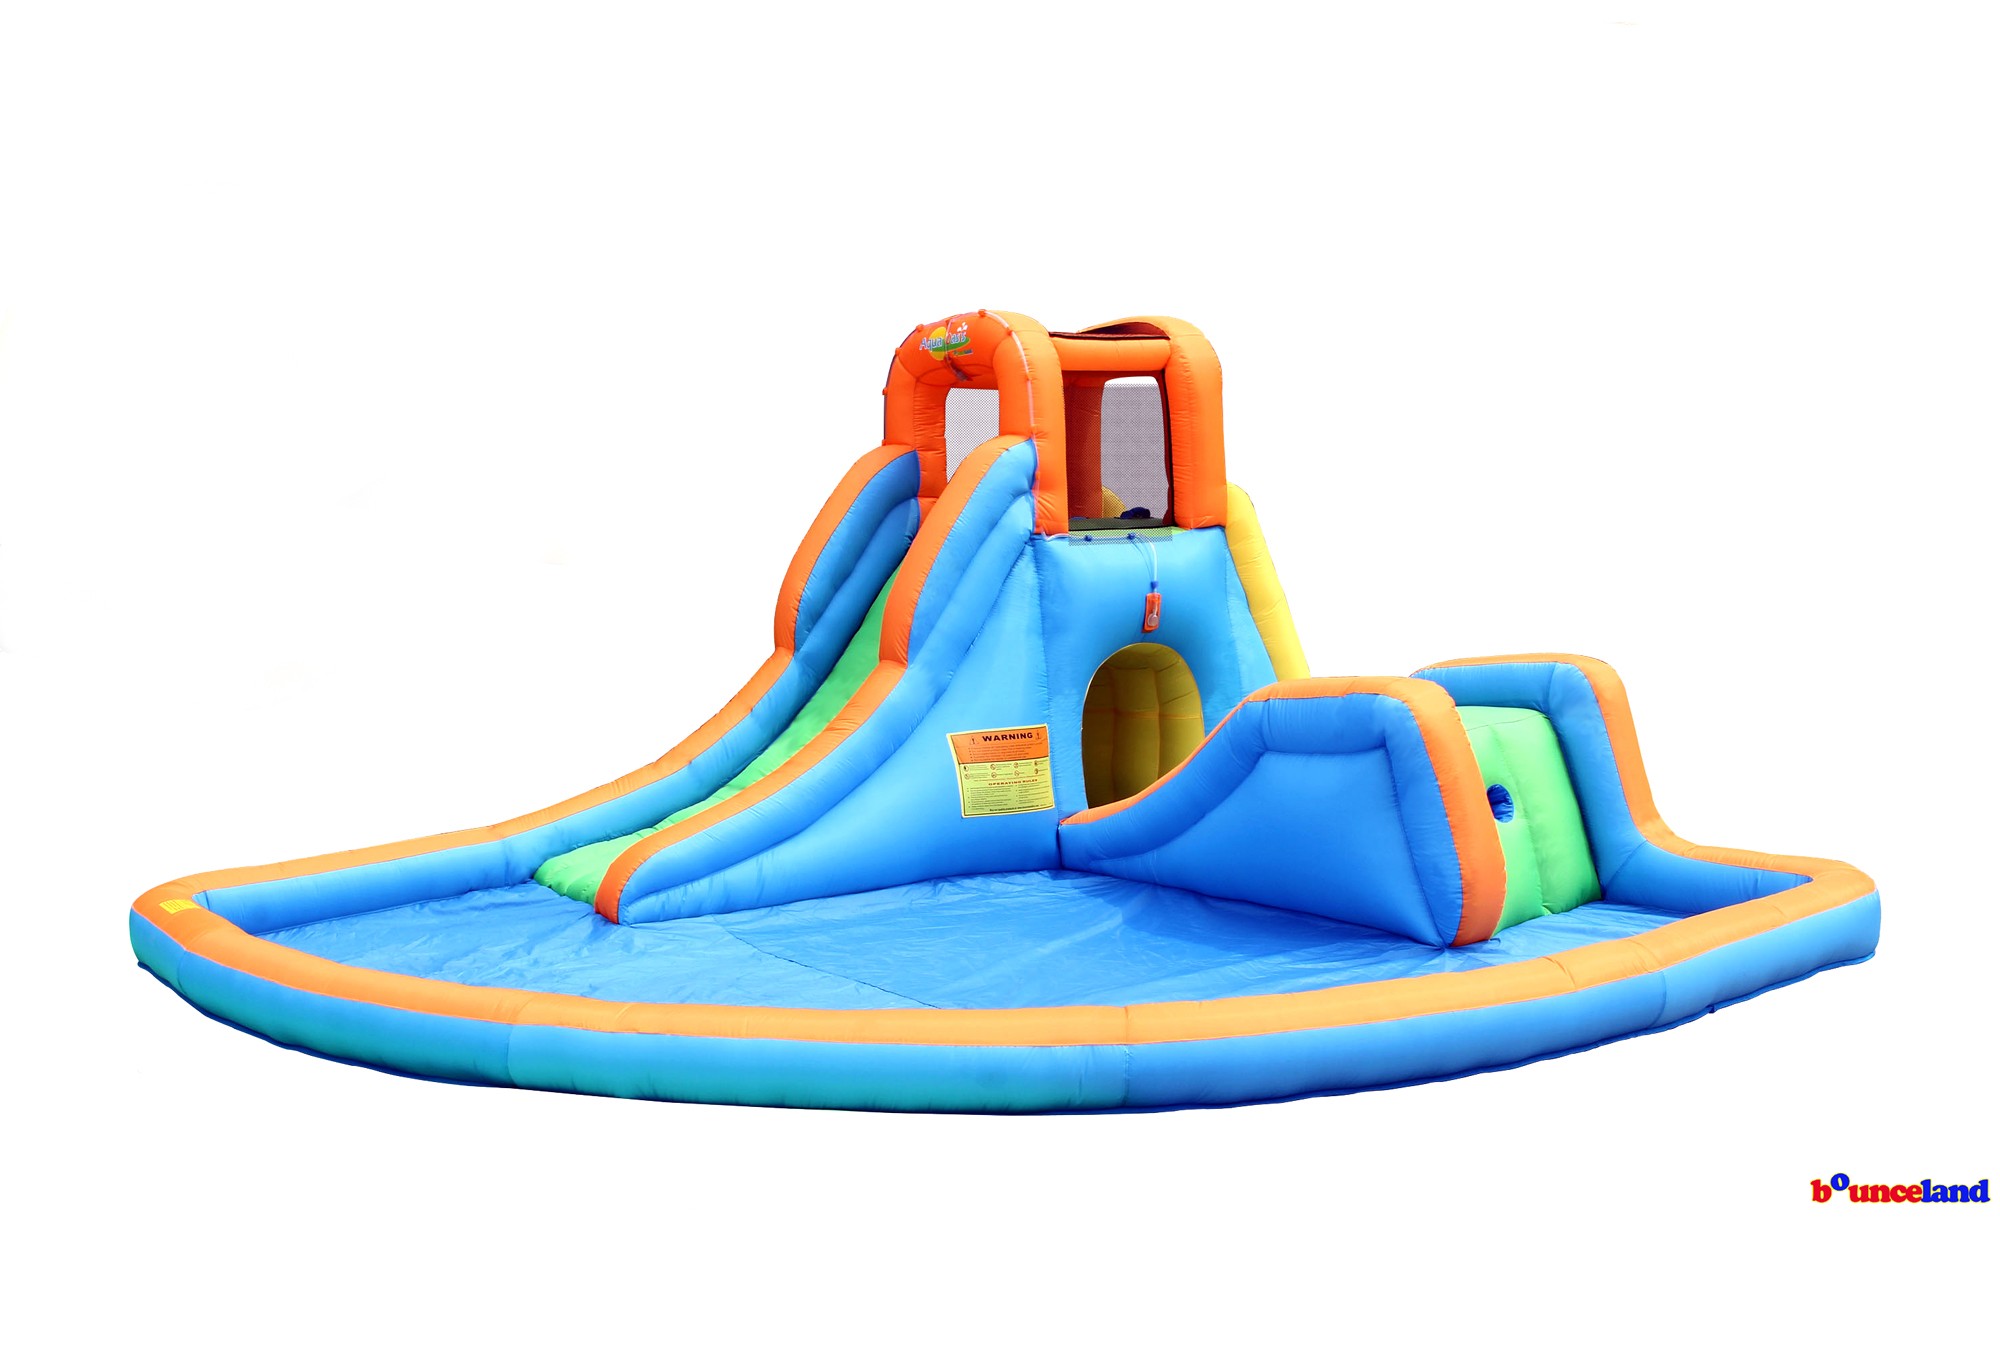 Bounceland Cascade Water Slides with large pool - image 1 of 3